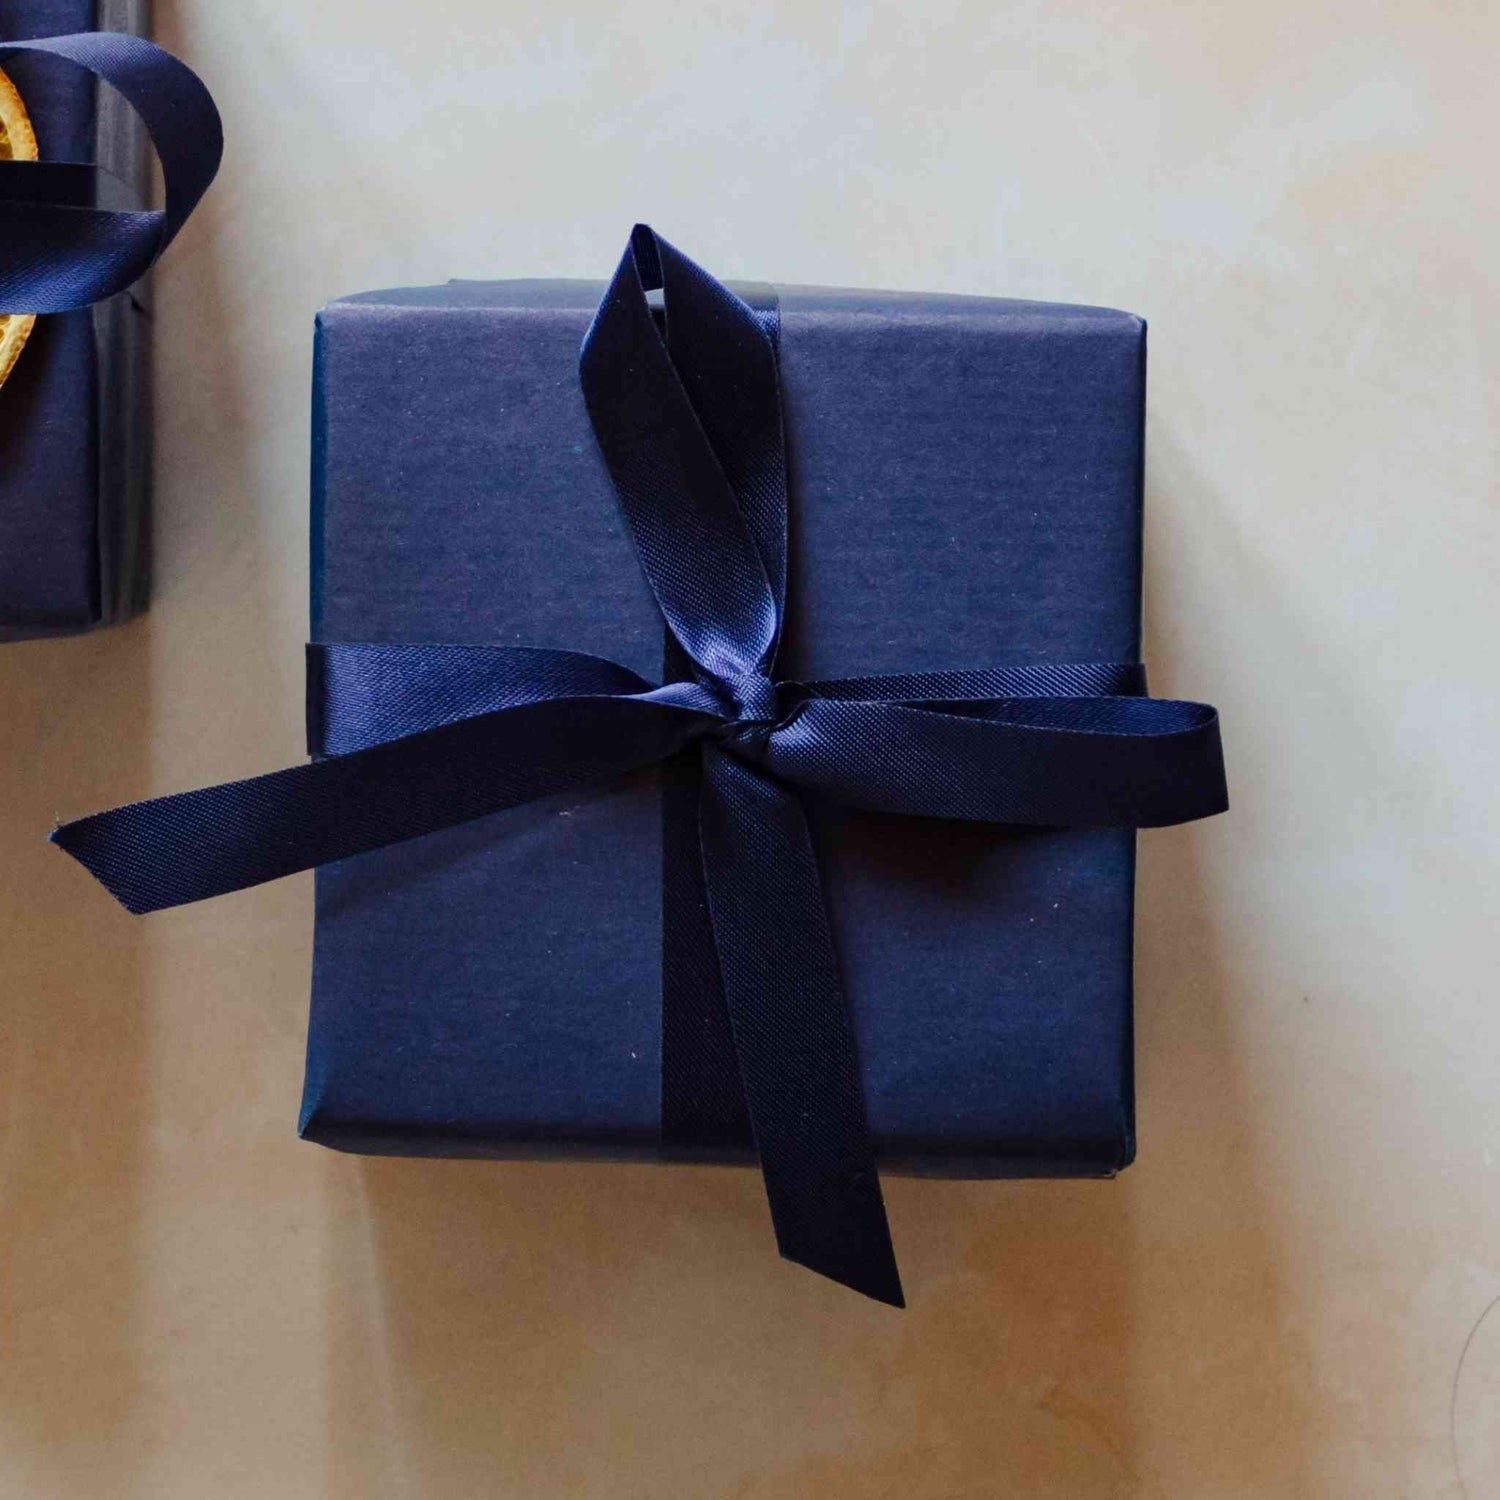 A 200g woody soy candle from the Home County Co. is shown with luxury Gift Wrap. The candle is wrapped in luxury navy wrapping paper secured with navy ribbon.